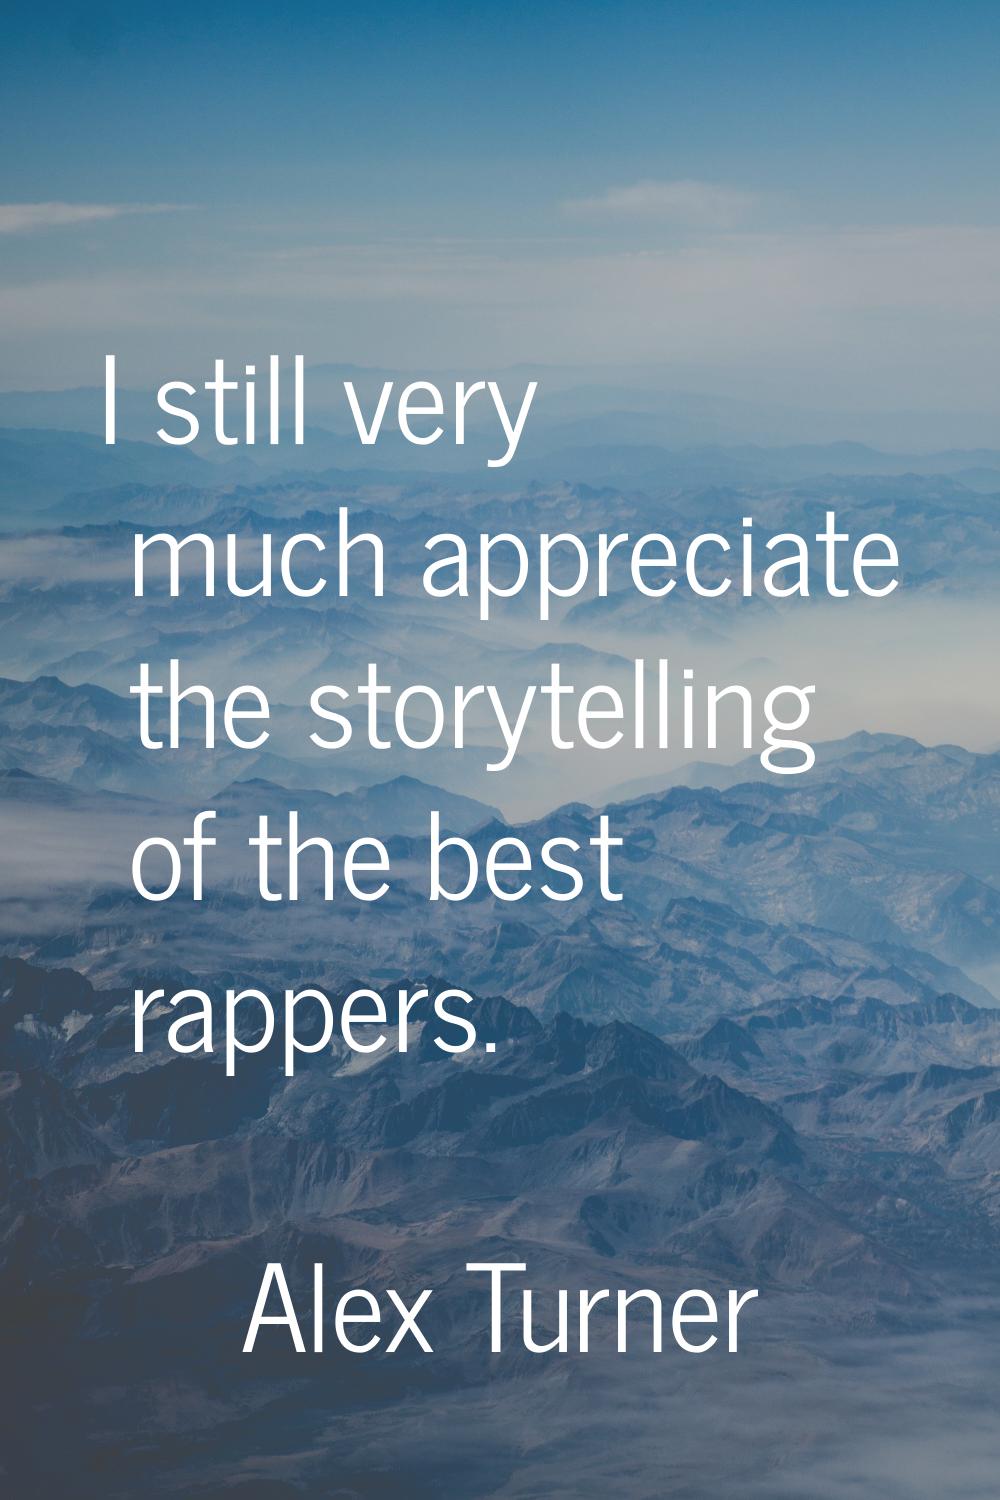 I still very much appreciate the storytelling of the best rappers.